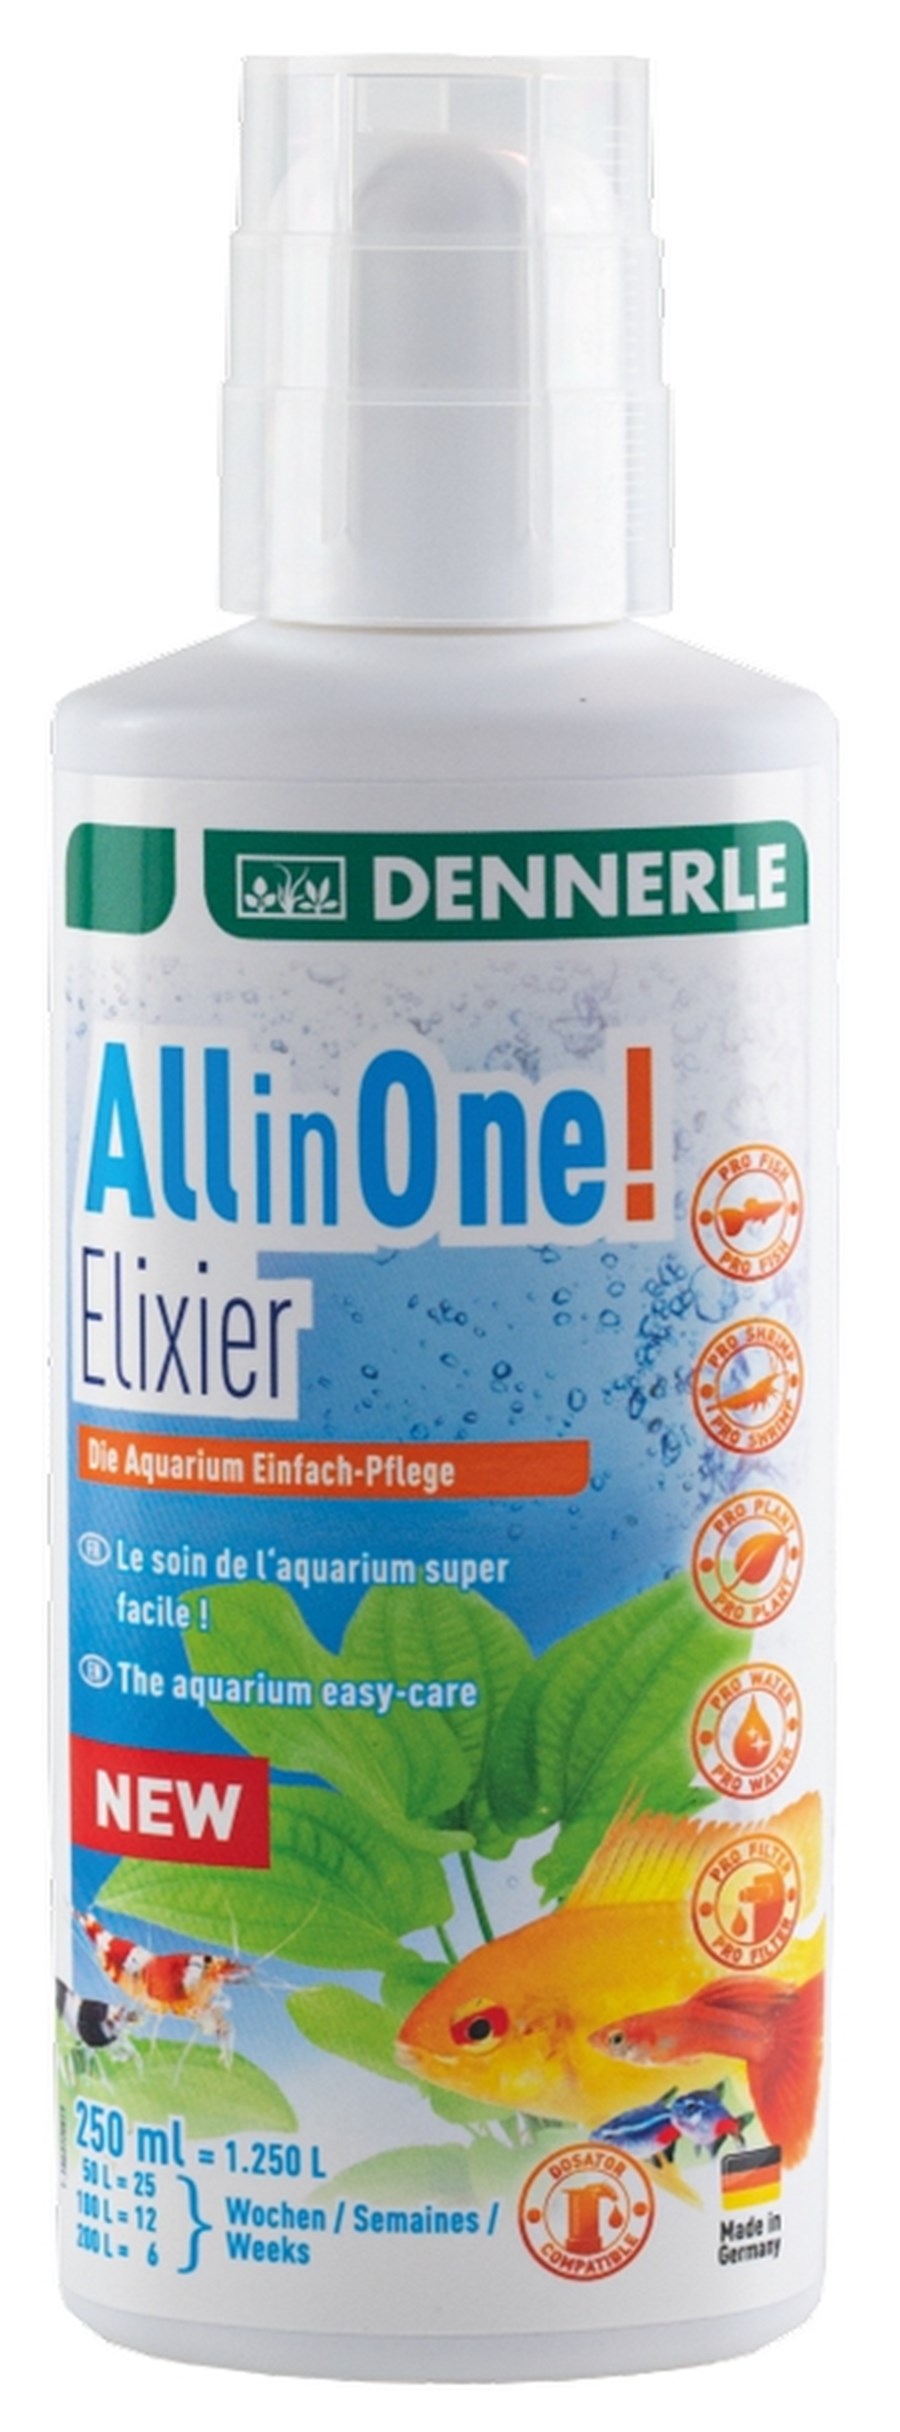 All in One! Elixier 100ml